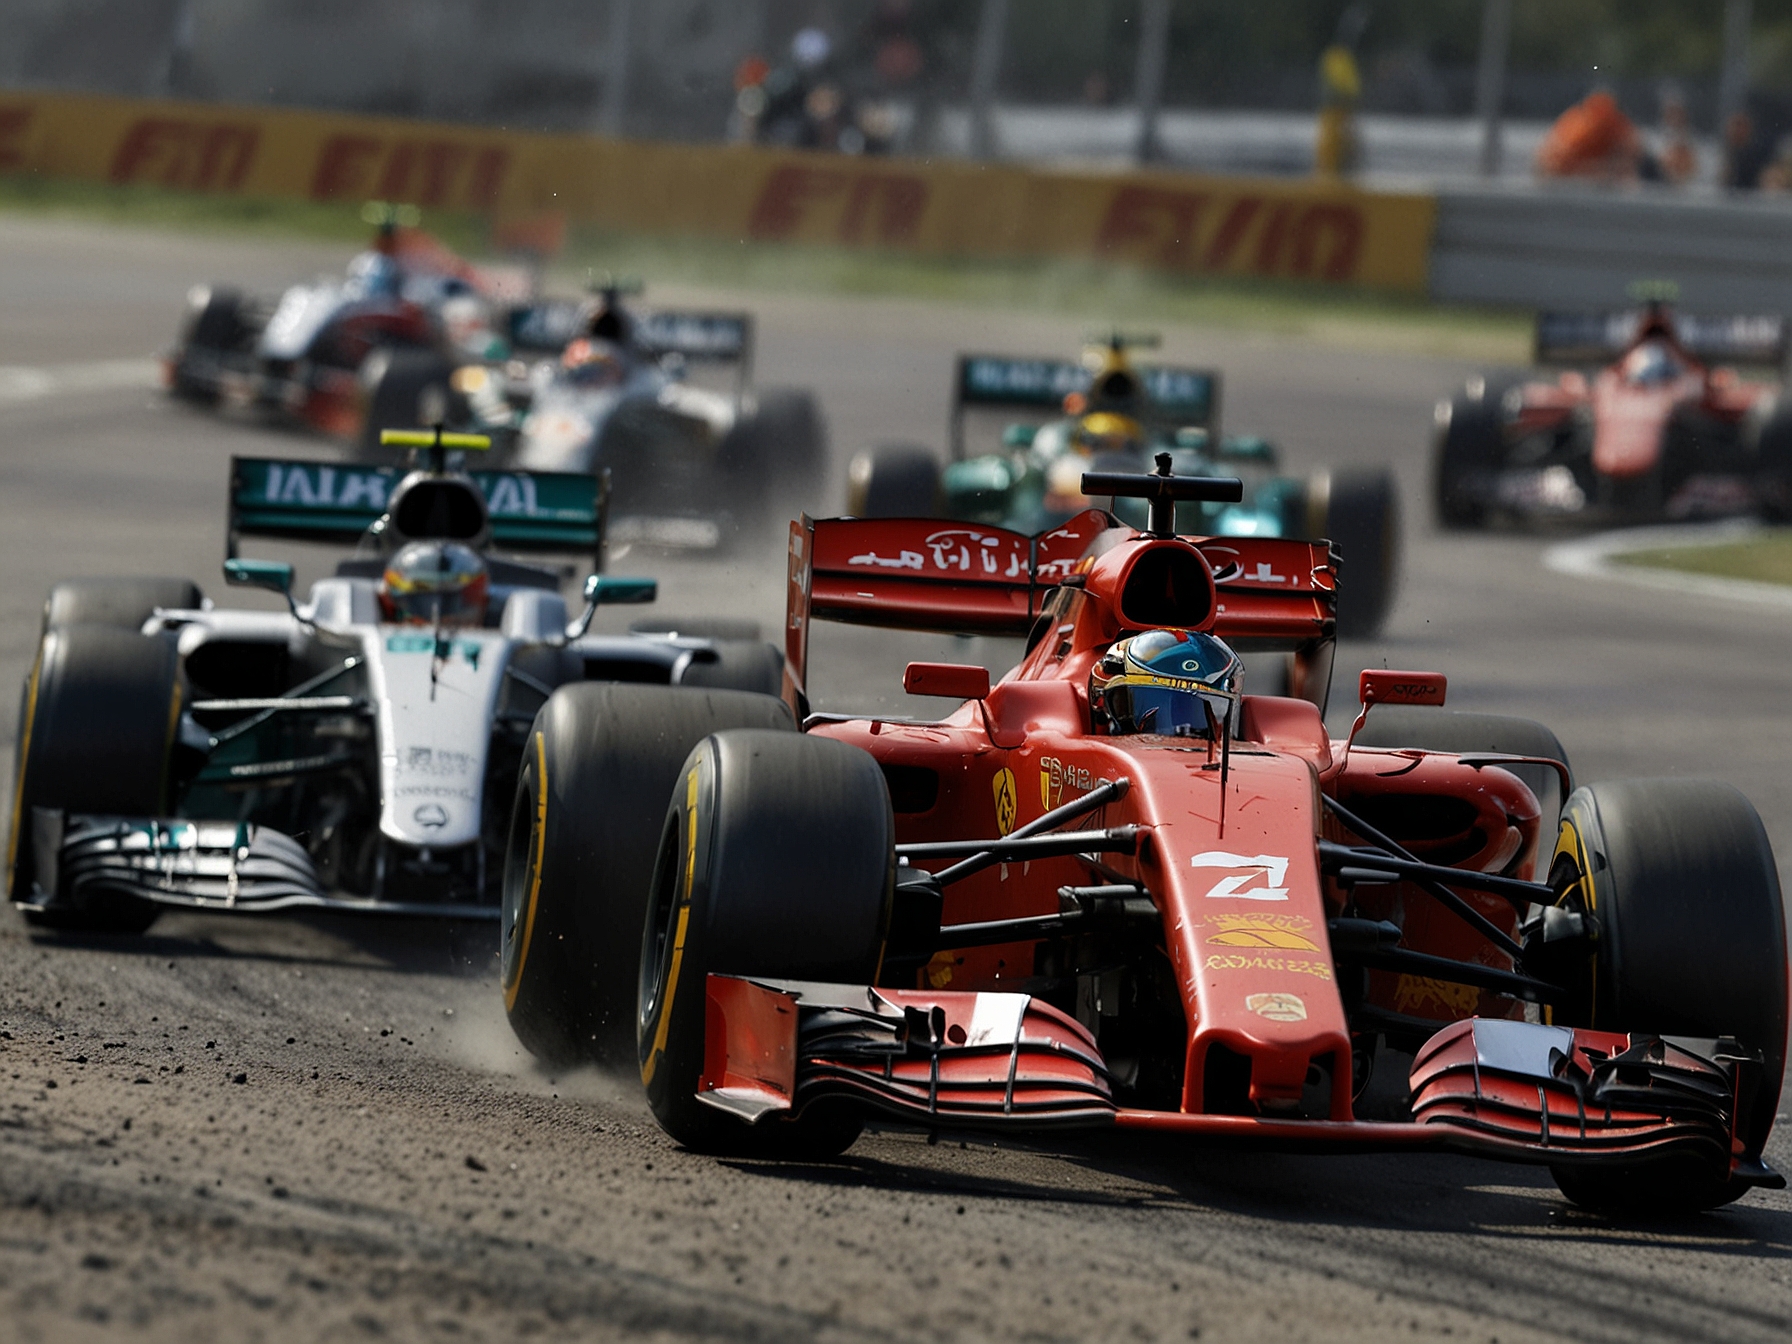 A thrilling race moment at the Spanish GP with cars from Mercedes and Ferrari leading the pack, illustrating the competitive nature of the race and highlighting Marko's bold prediction.